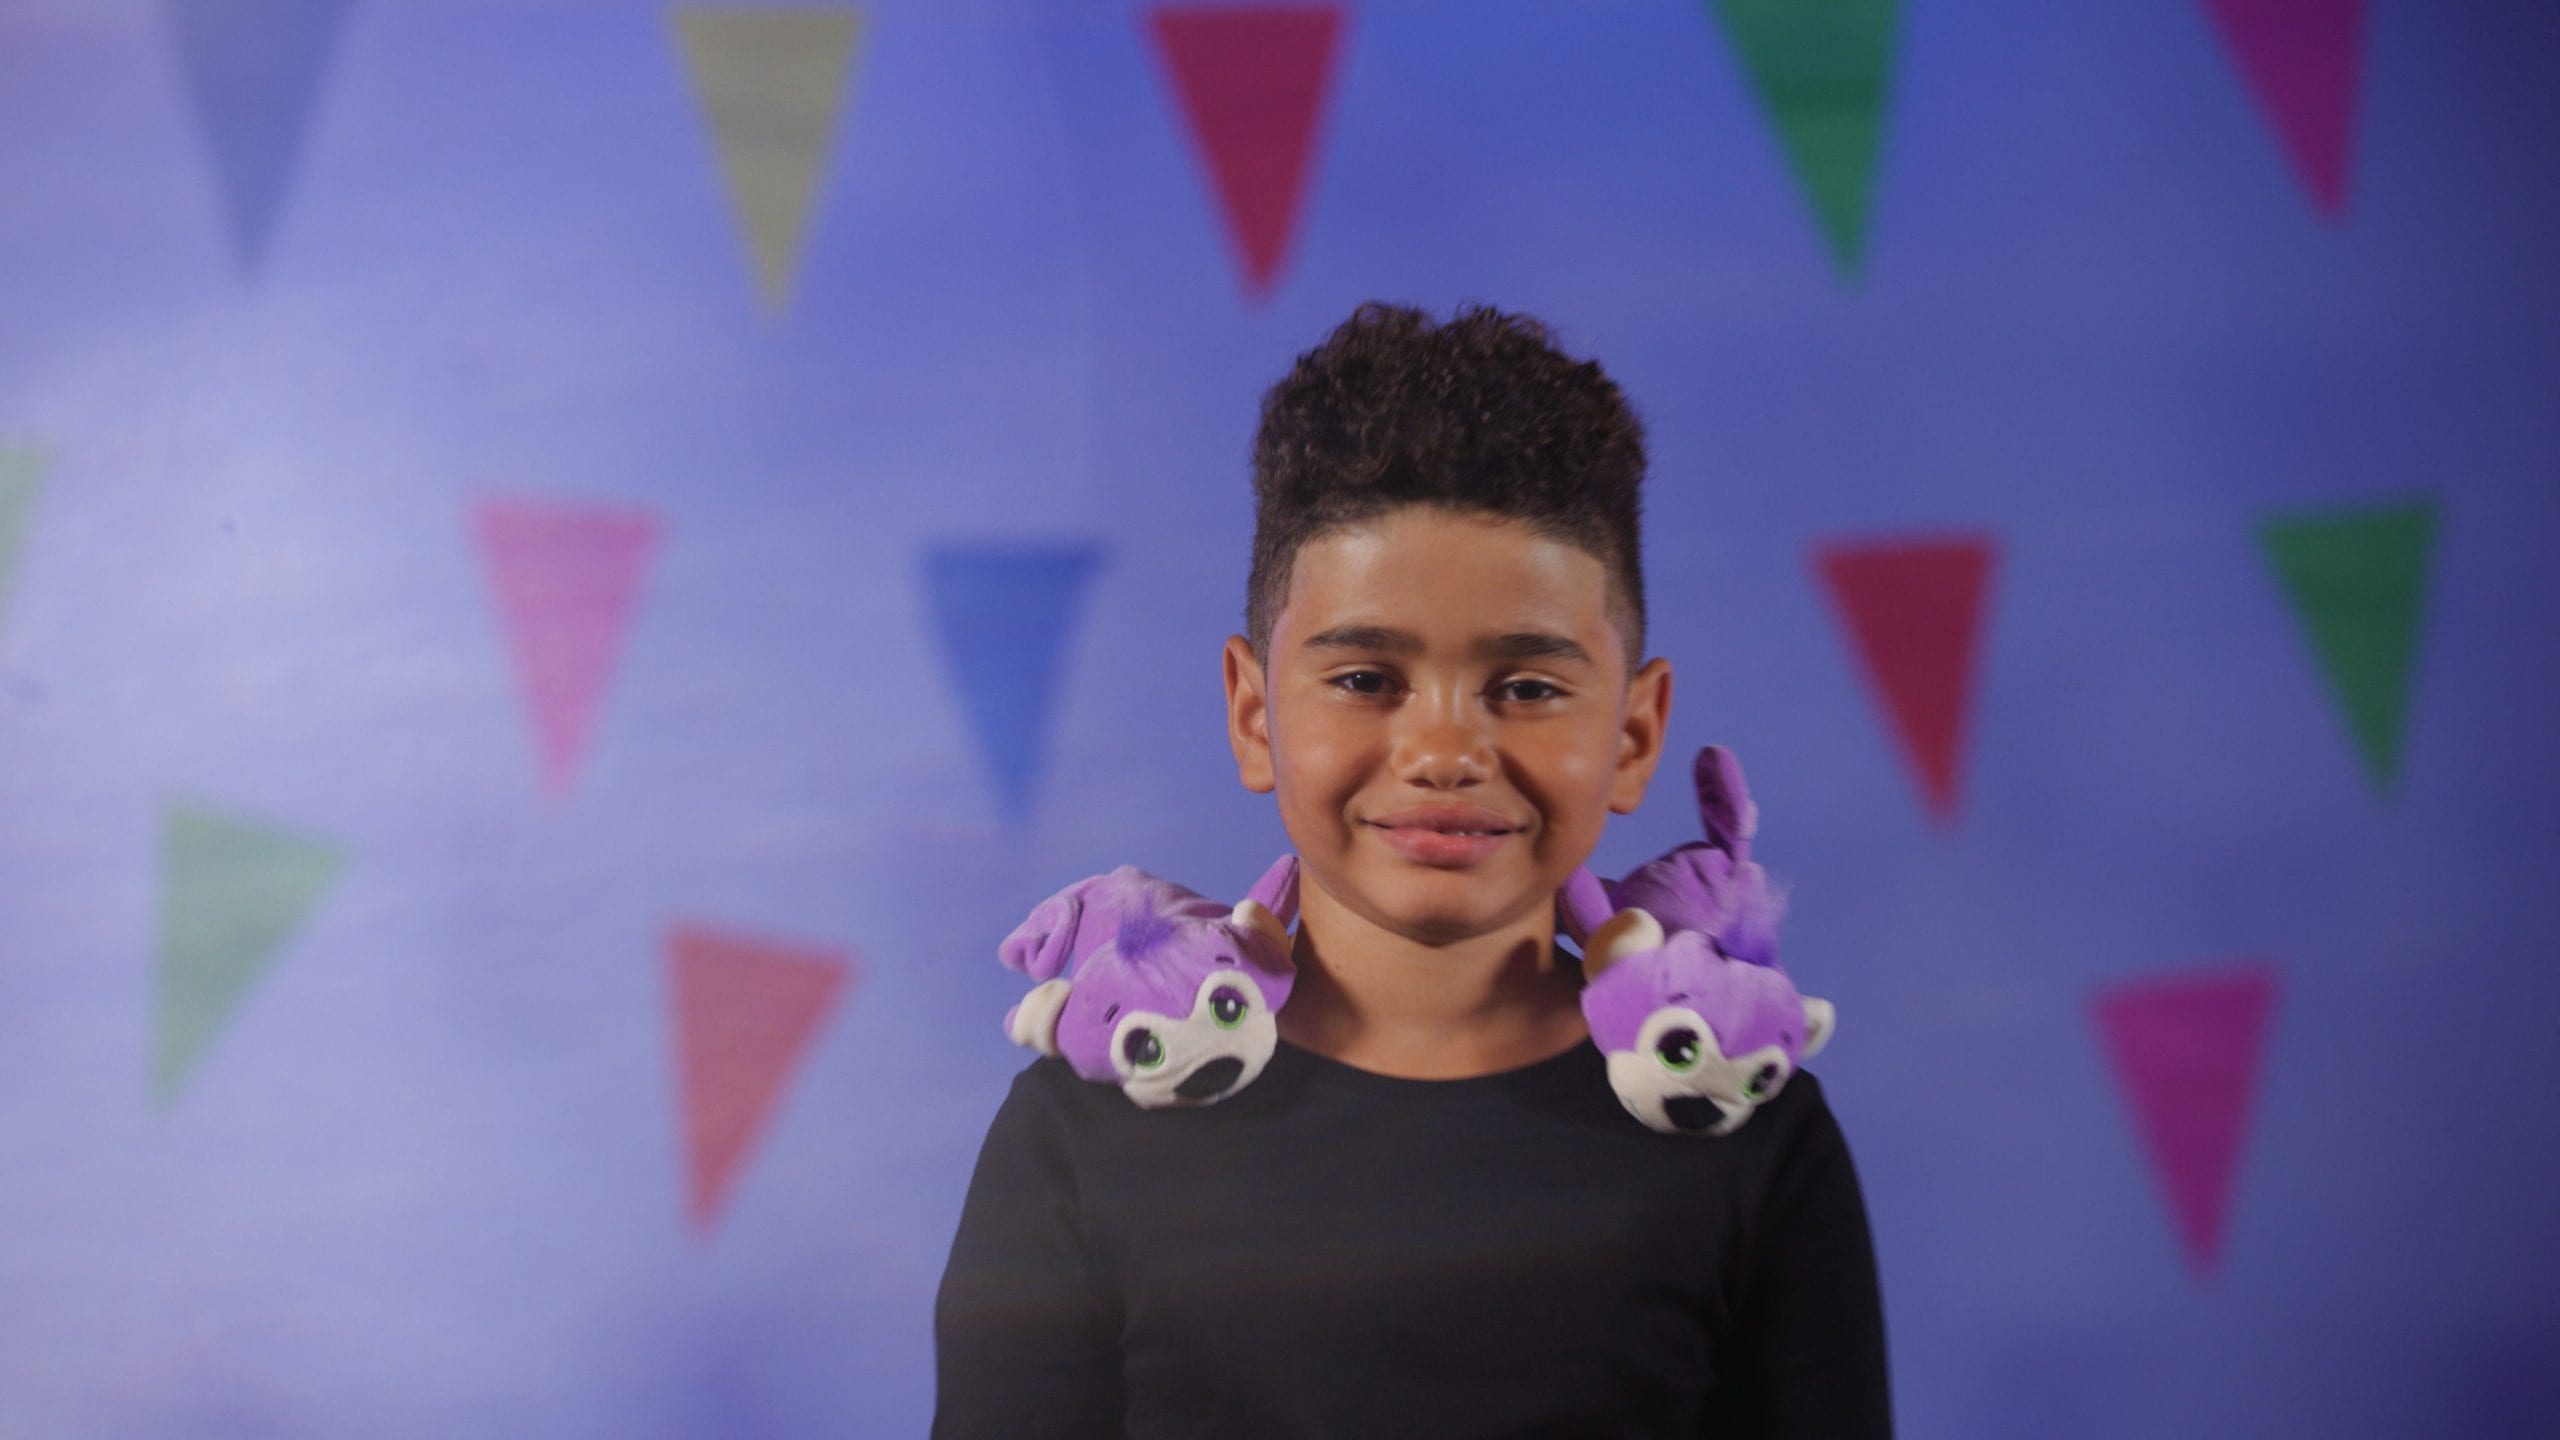 Male child posing for camera smiling with two purple stuffed animals on his shoulders